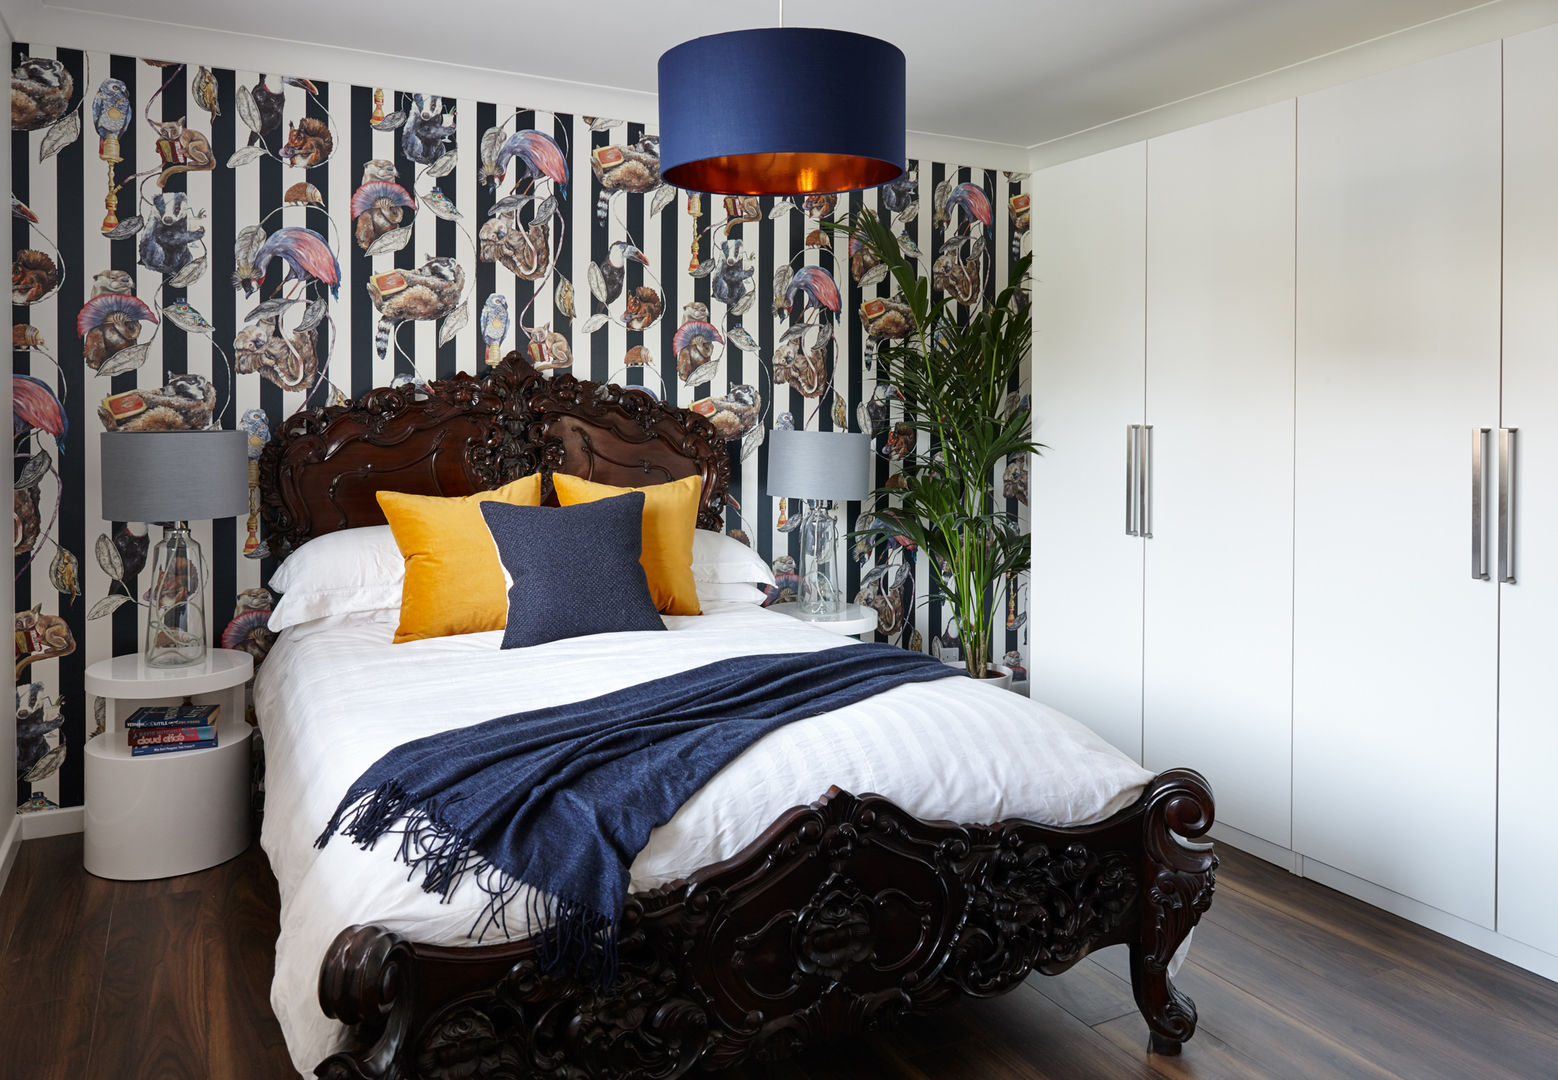 Virginia Water Apartment - Surrey Bhavin Taylor Design Modern style bedroom bedroom,bed,rococo style,wallpaper,anaimals,blue,yellow,wardrobes,storage,plant,bedding